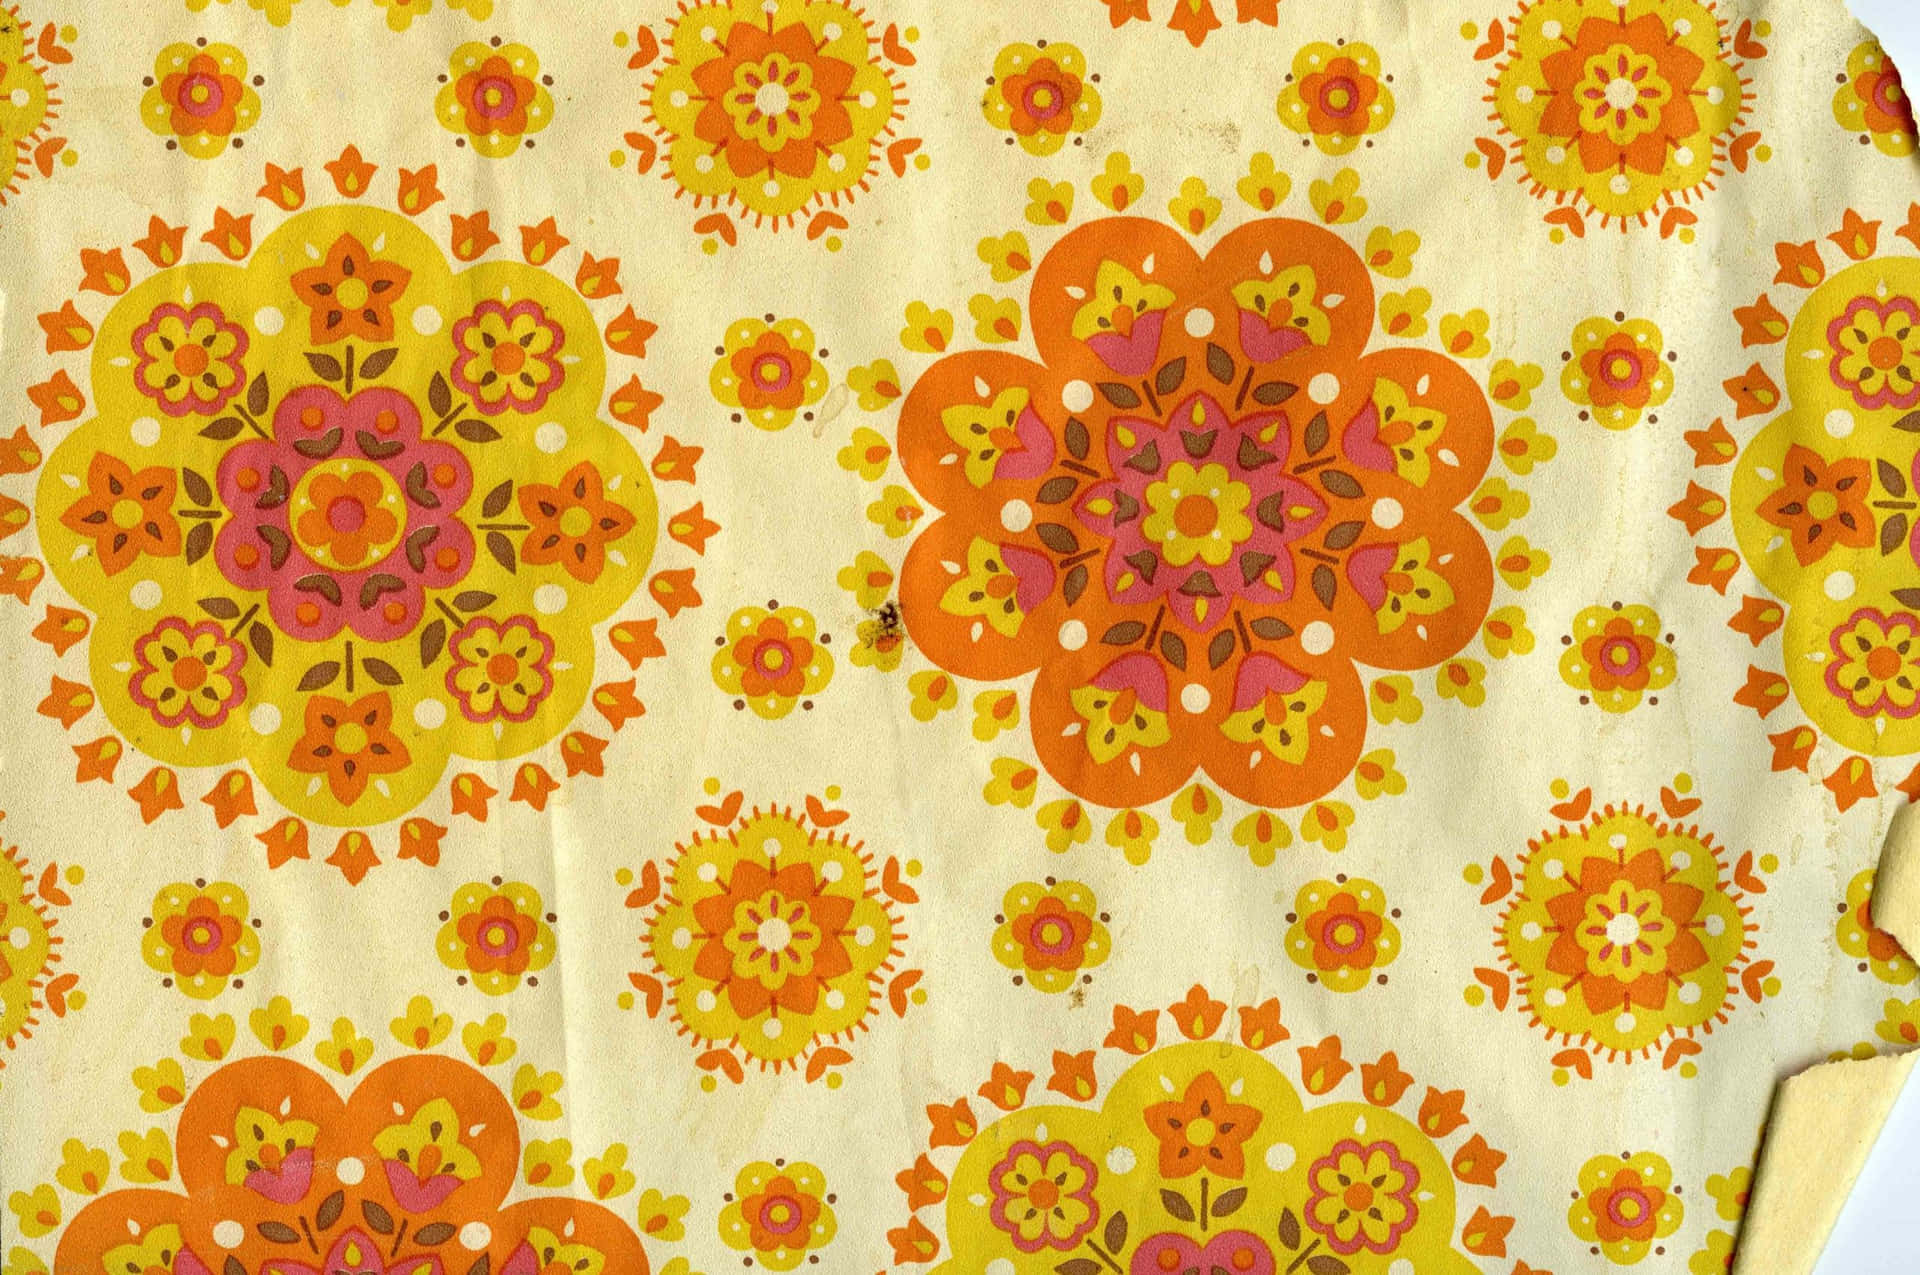 Step Back in Time to the Vibrant Sixties Wallpaper